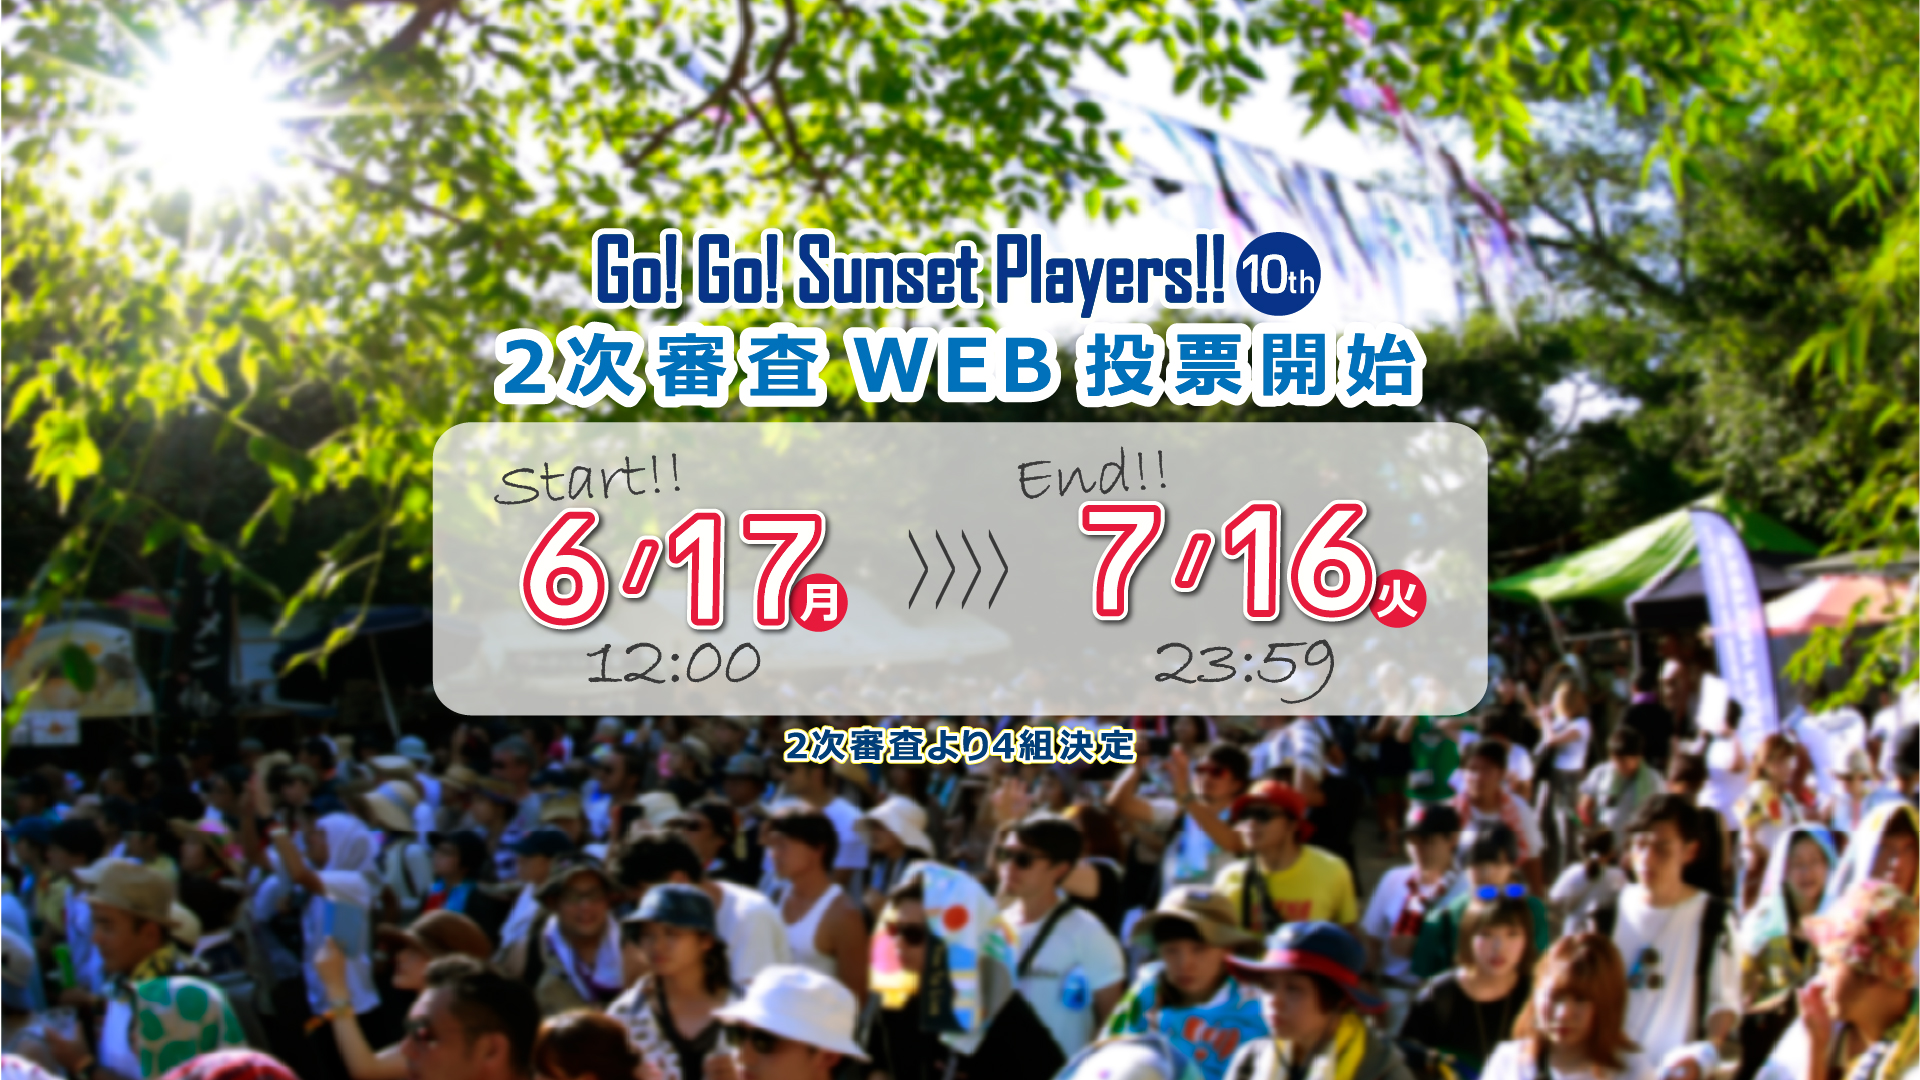 Go! Go! Sunset Players!!１次審査結果発表！